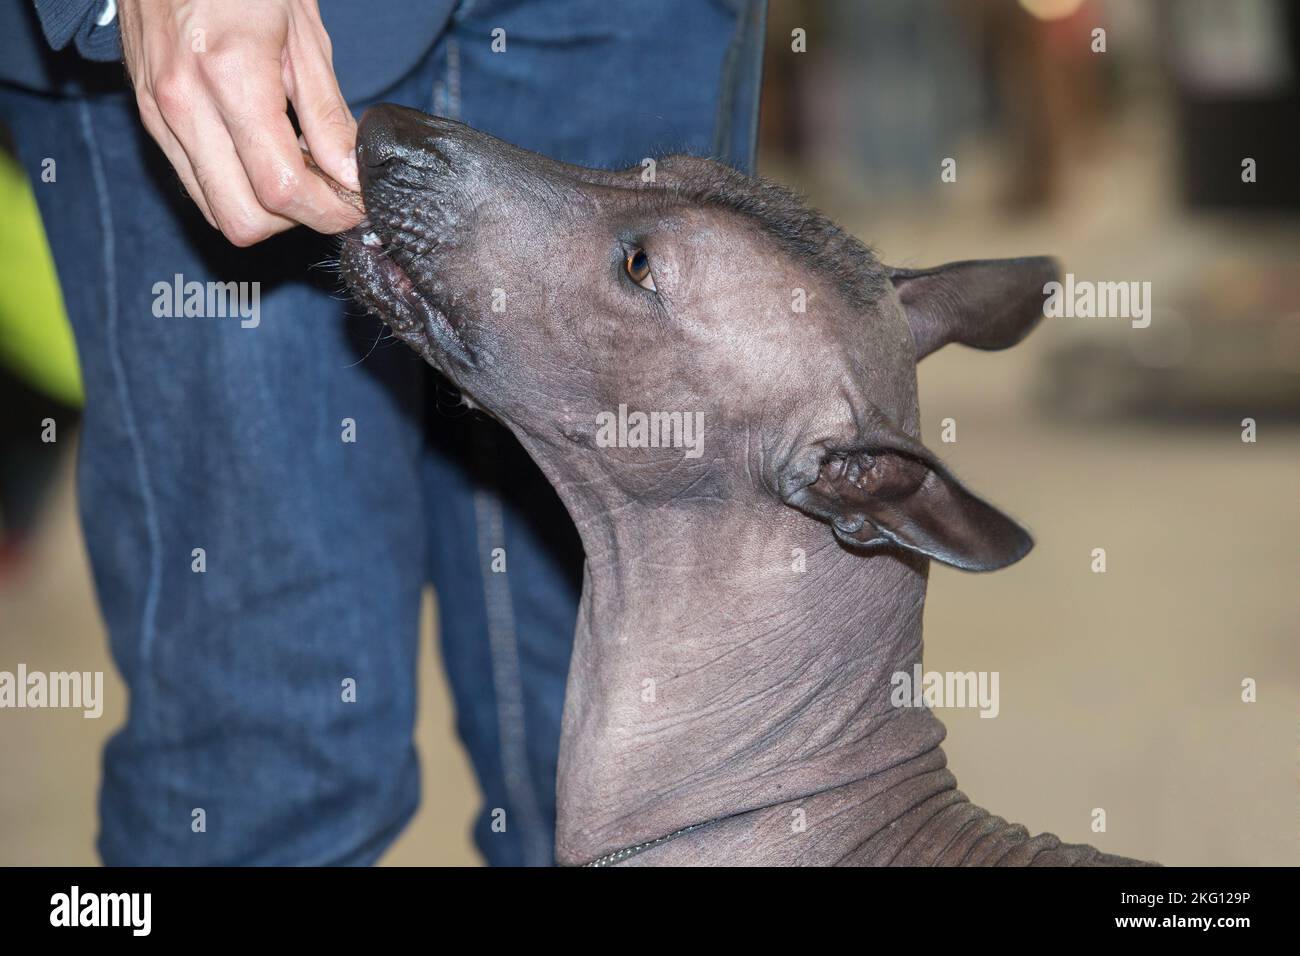 Pure breed Xoloitzcuintle dog. He is eating a cookie from his owner Stock Photo